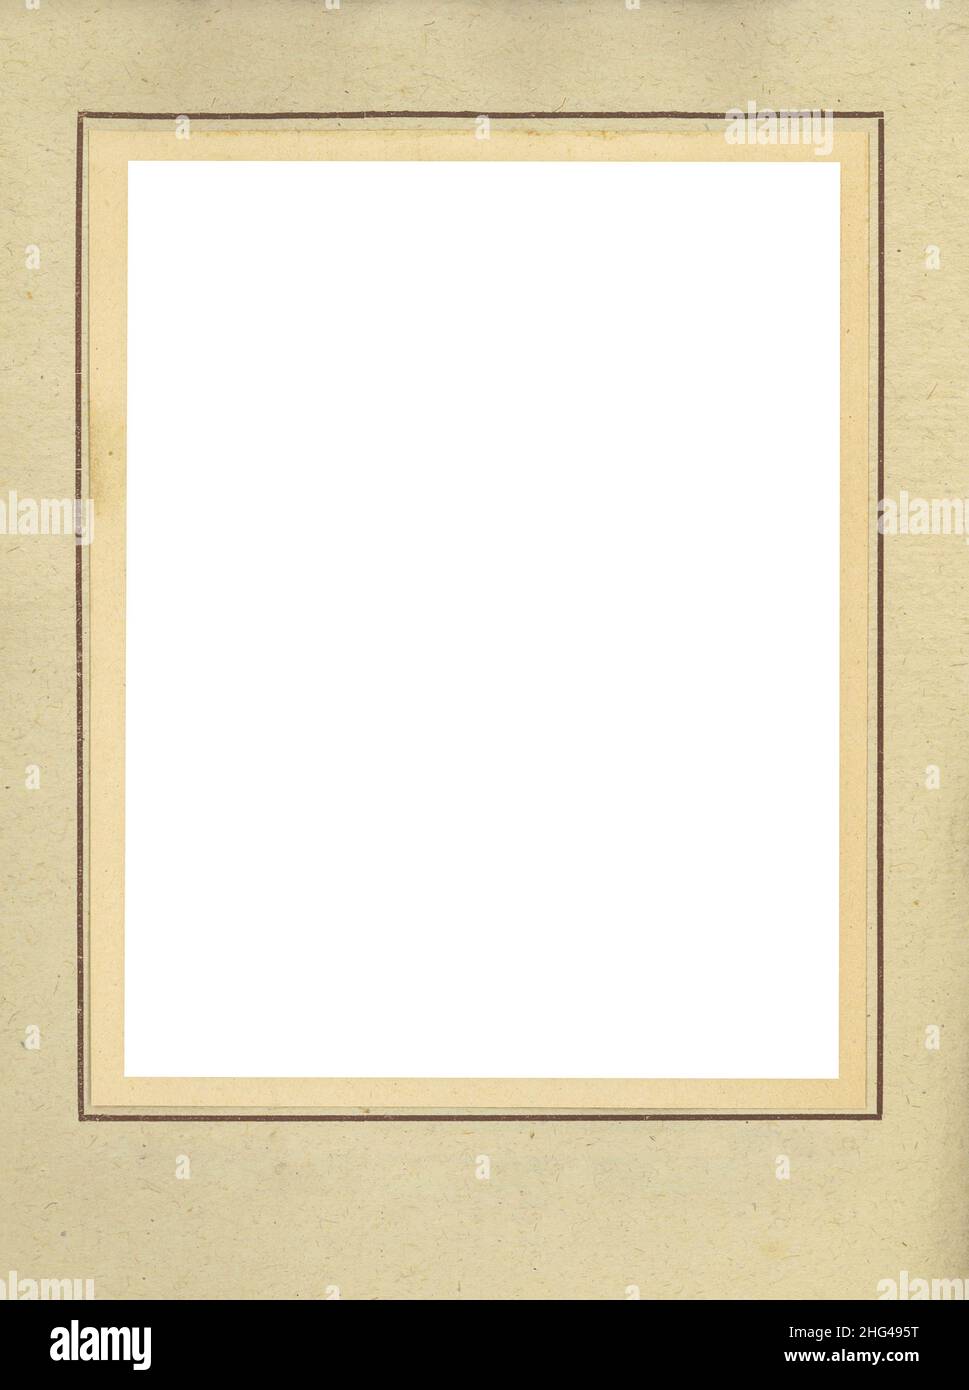 Blank Antique Paper With Vintage Border. Aged, yellowing paper